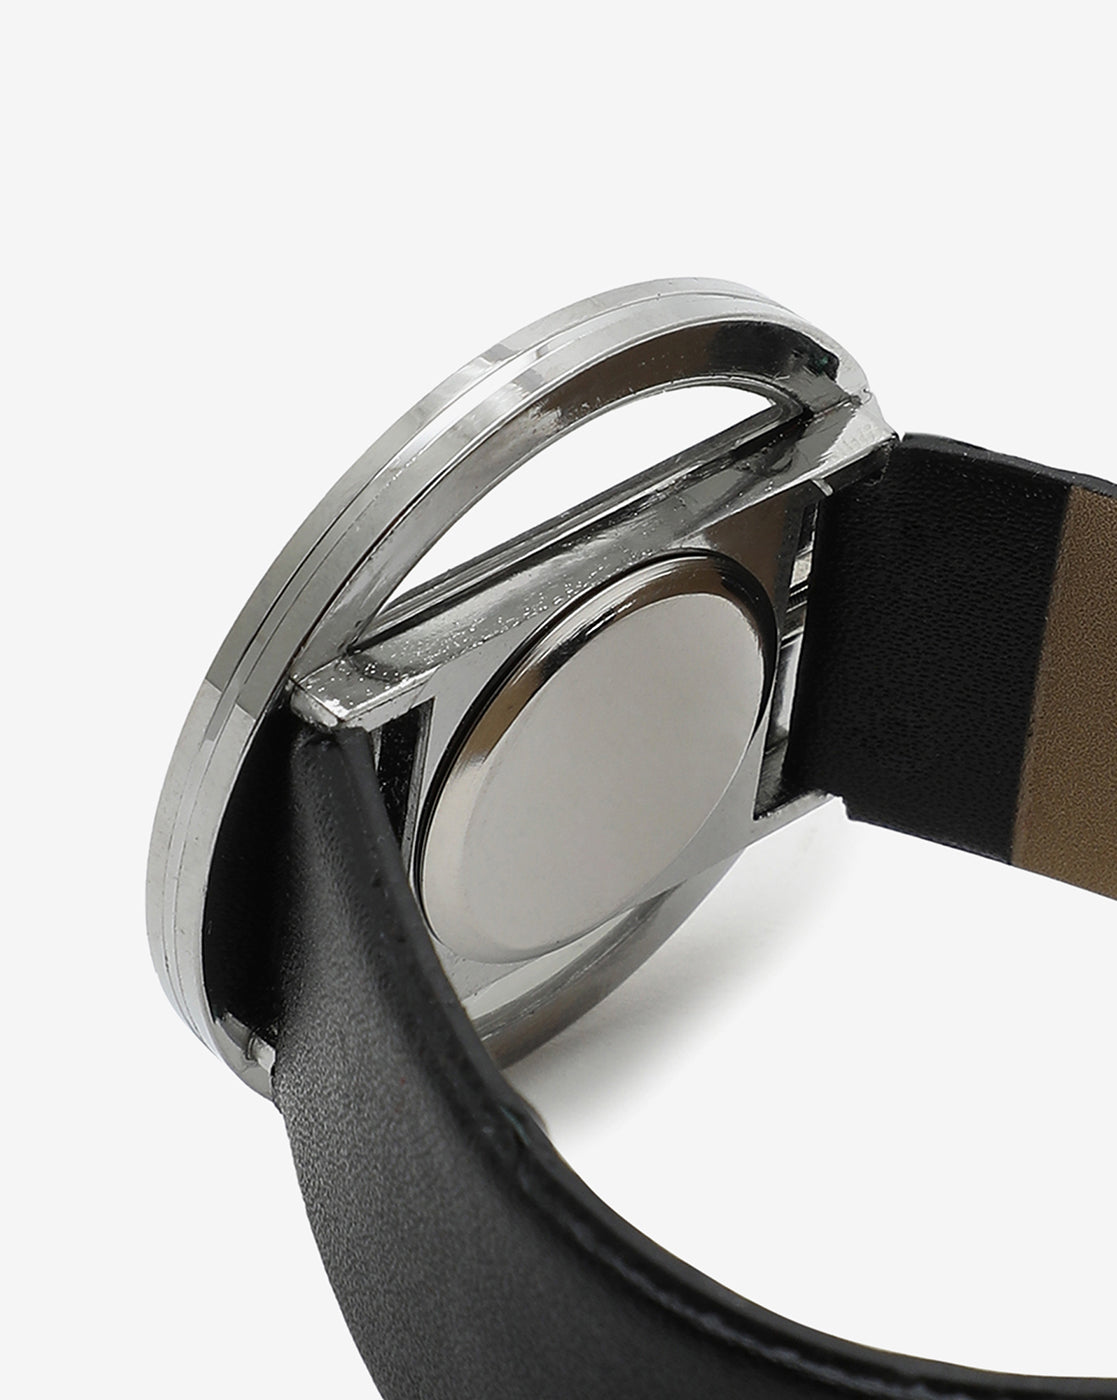 TRANSPARENT ANALOG ROUND DIAL WITH BLACK LEATHER STRAP